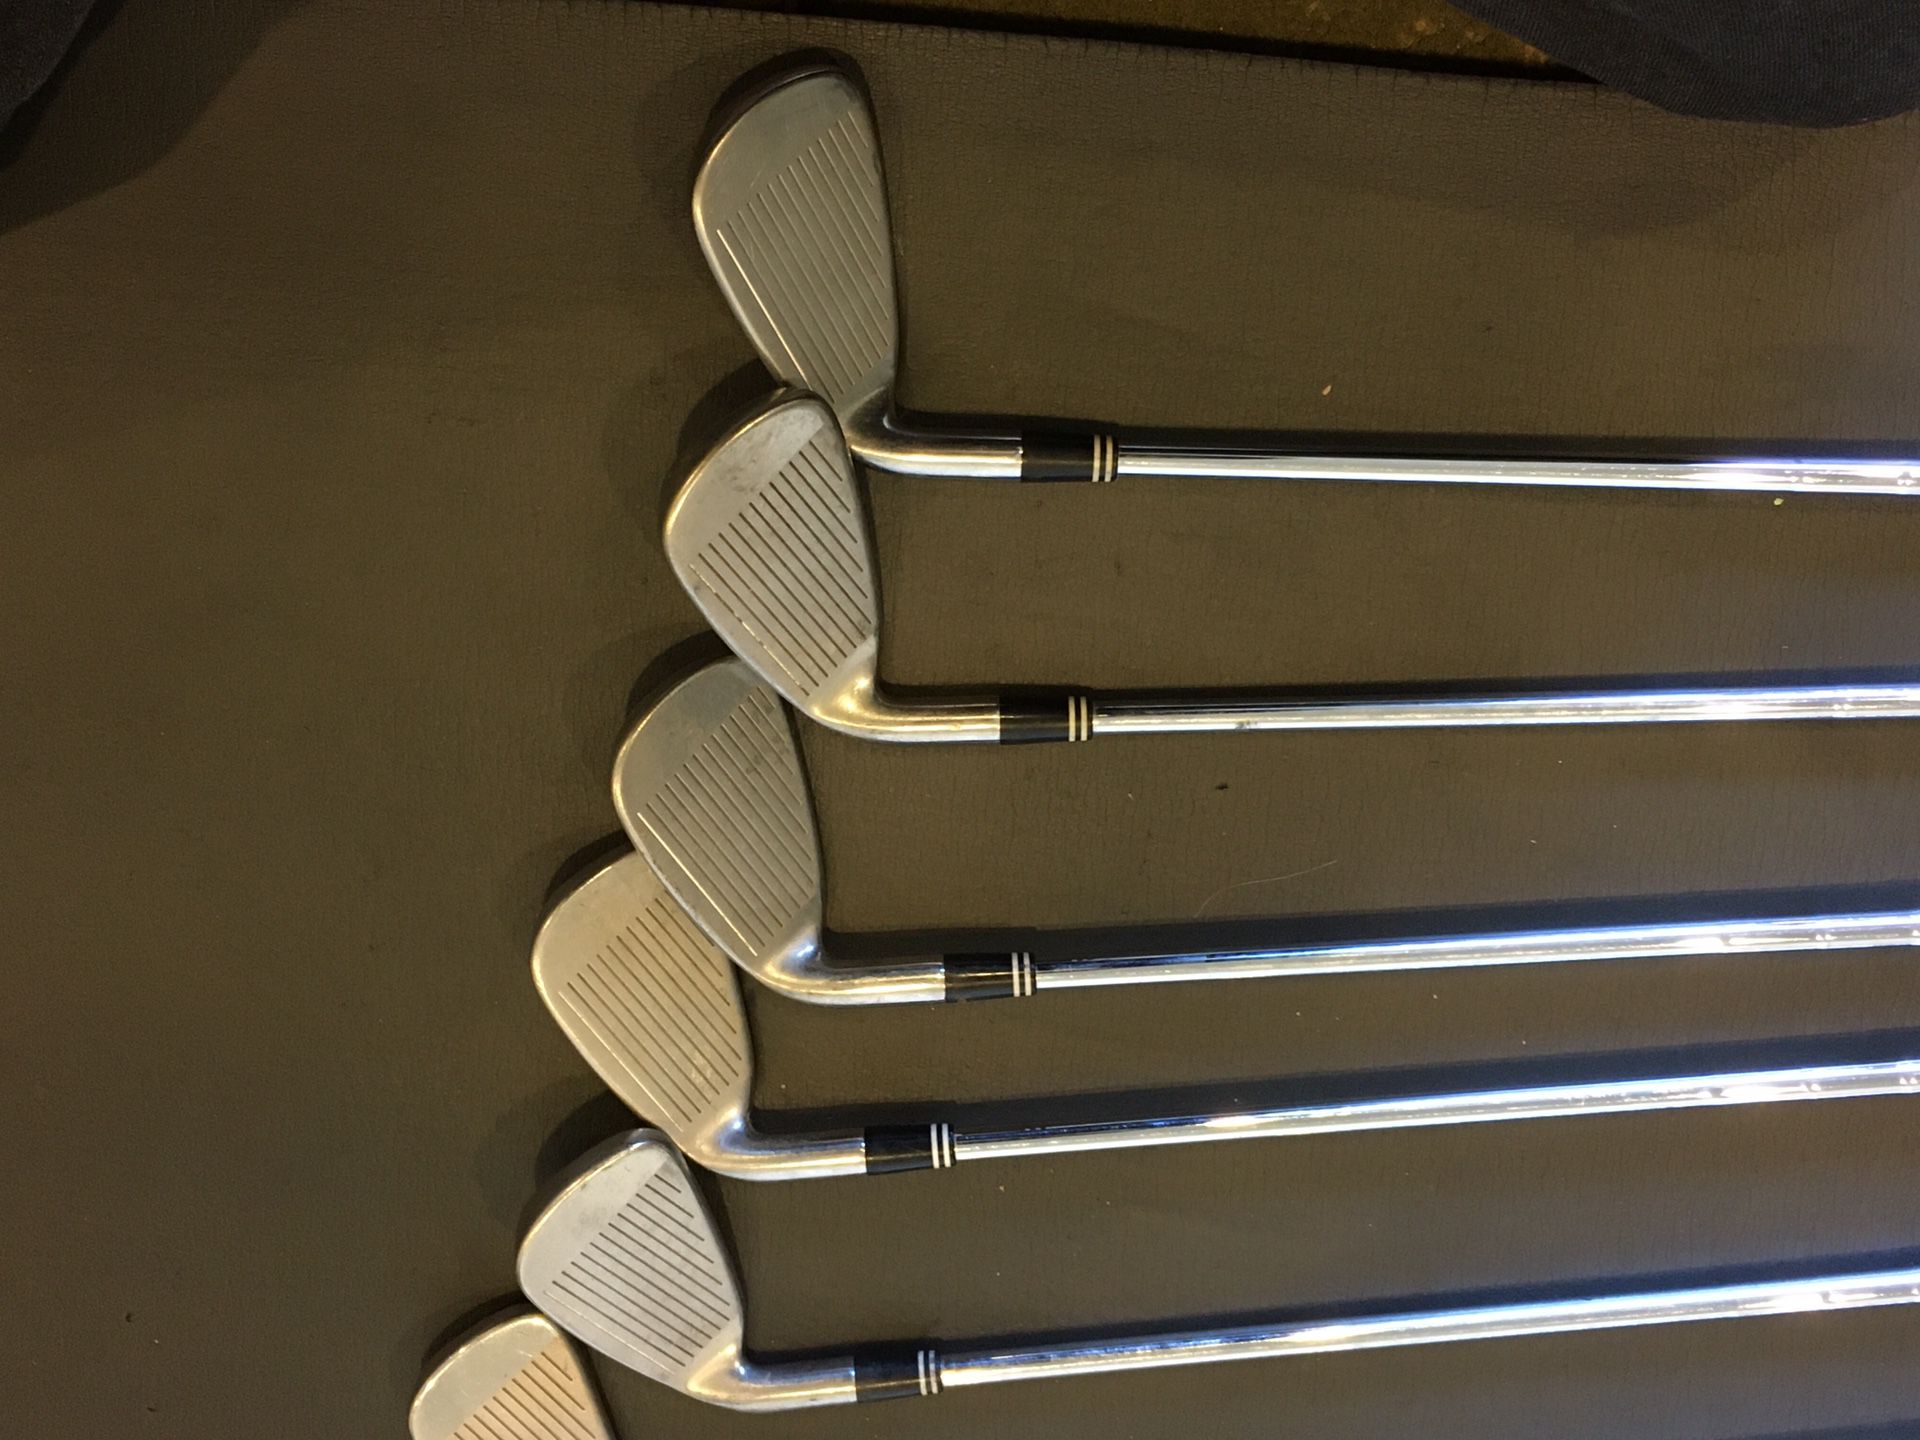 Cleveland Irons - CG7 (3-pw) R Flex for Sale in Santa Ana, CA - OfferUp